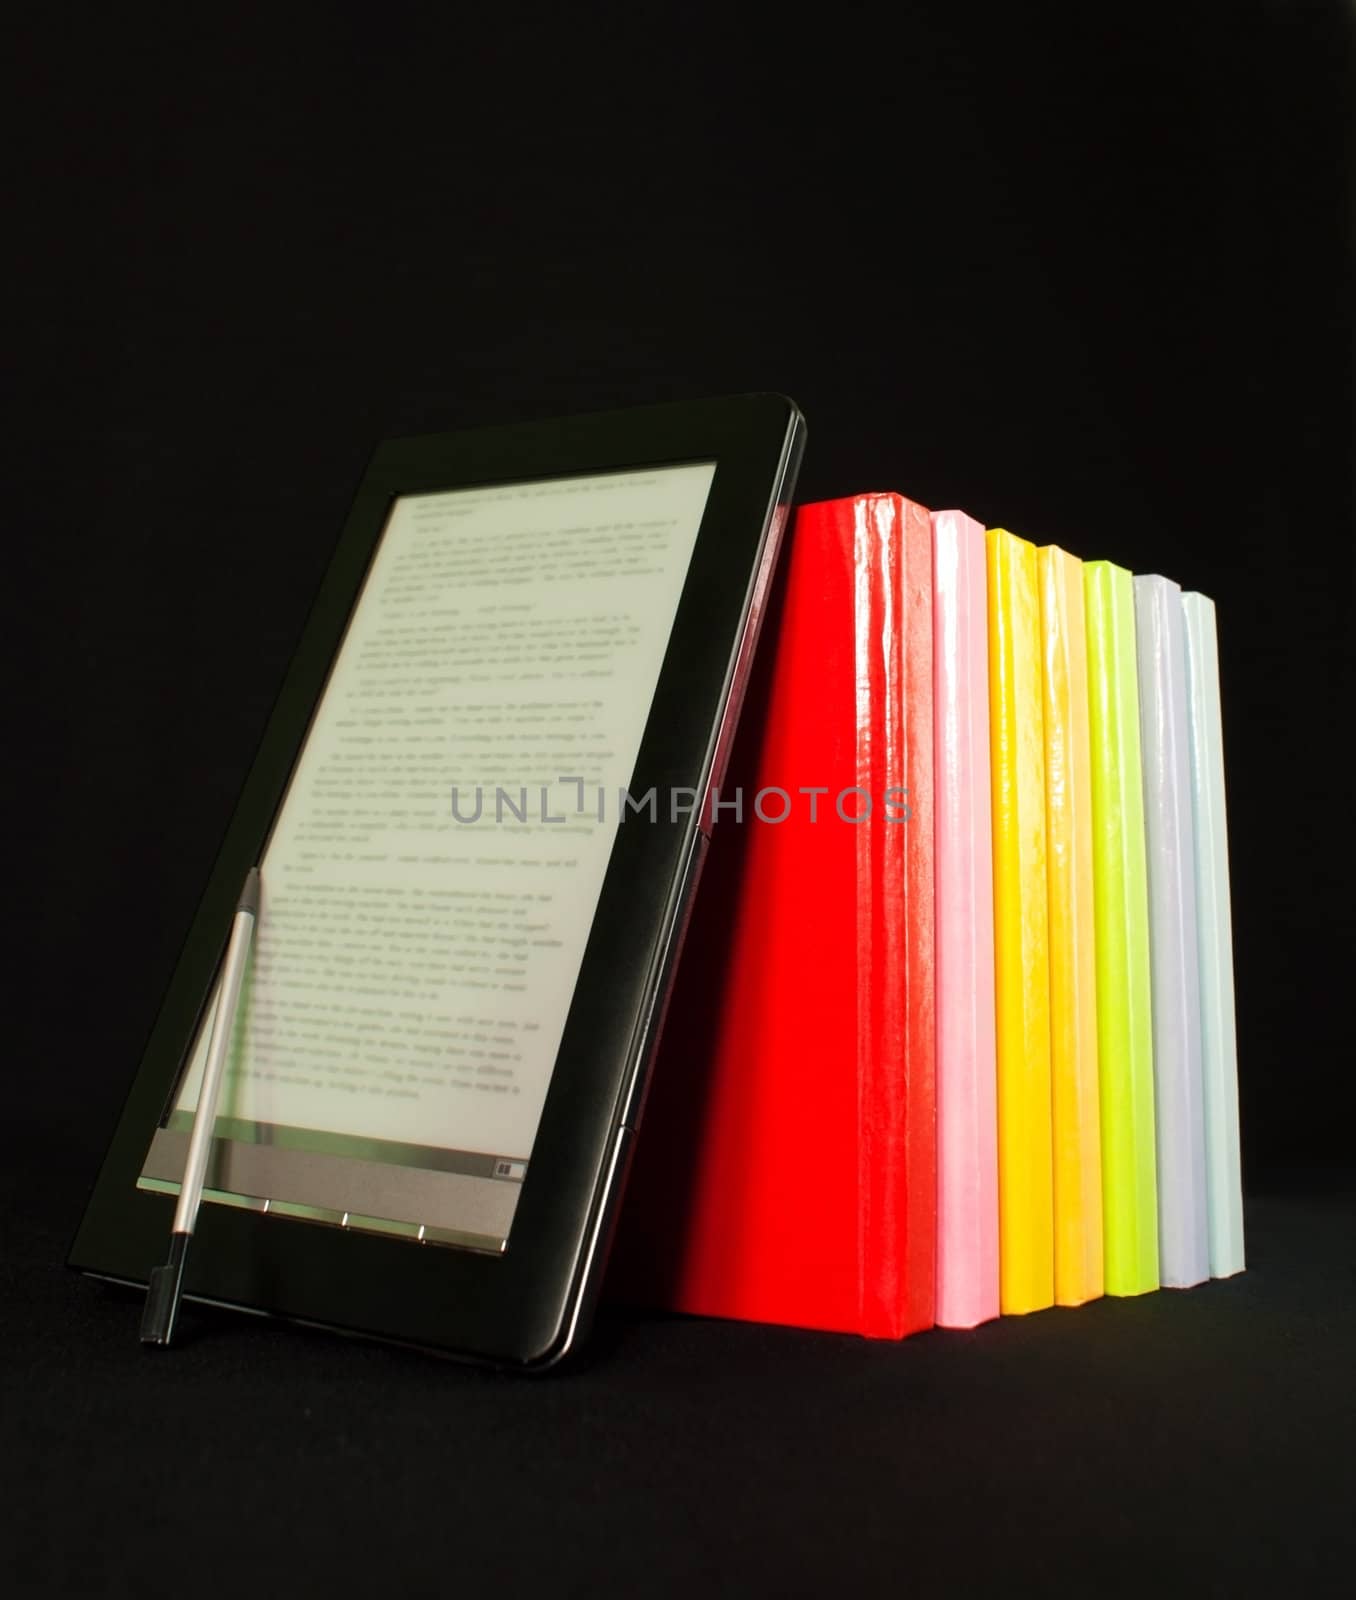 Row of colorful books and electronic book reader on the black background by AndreyKr